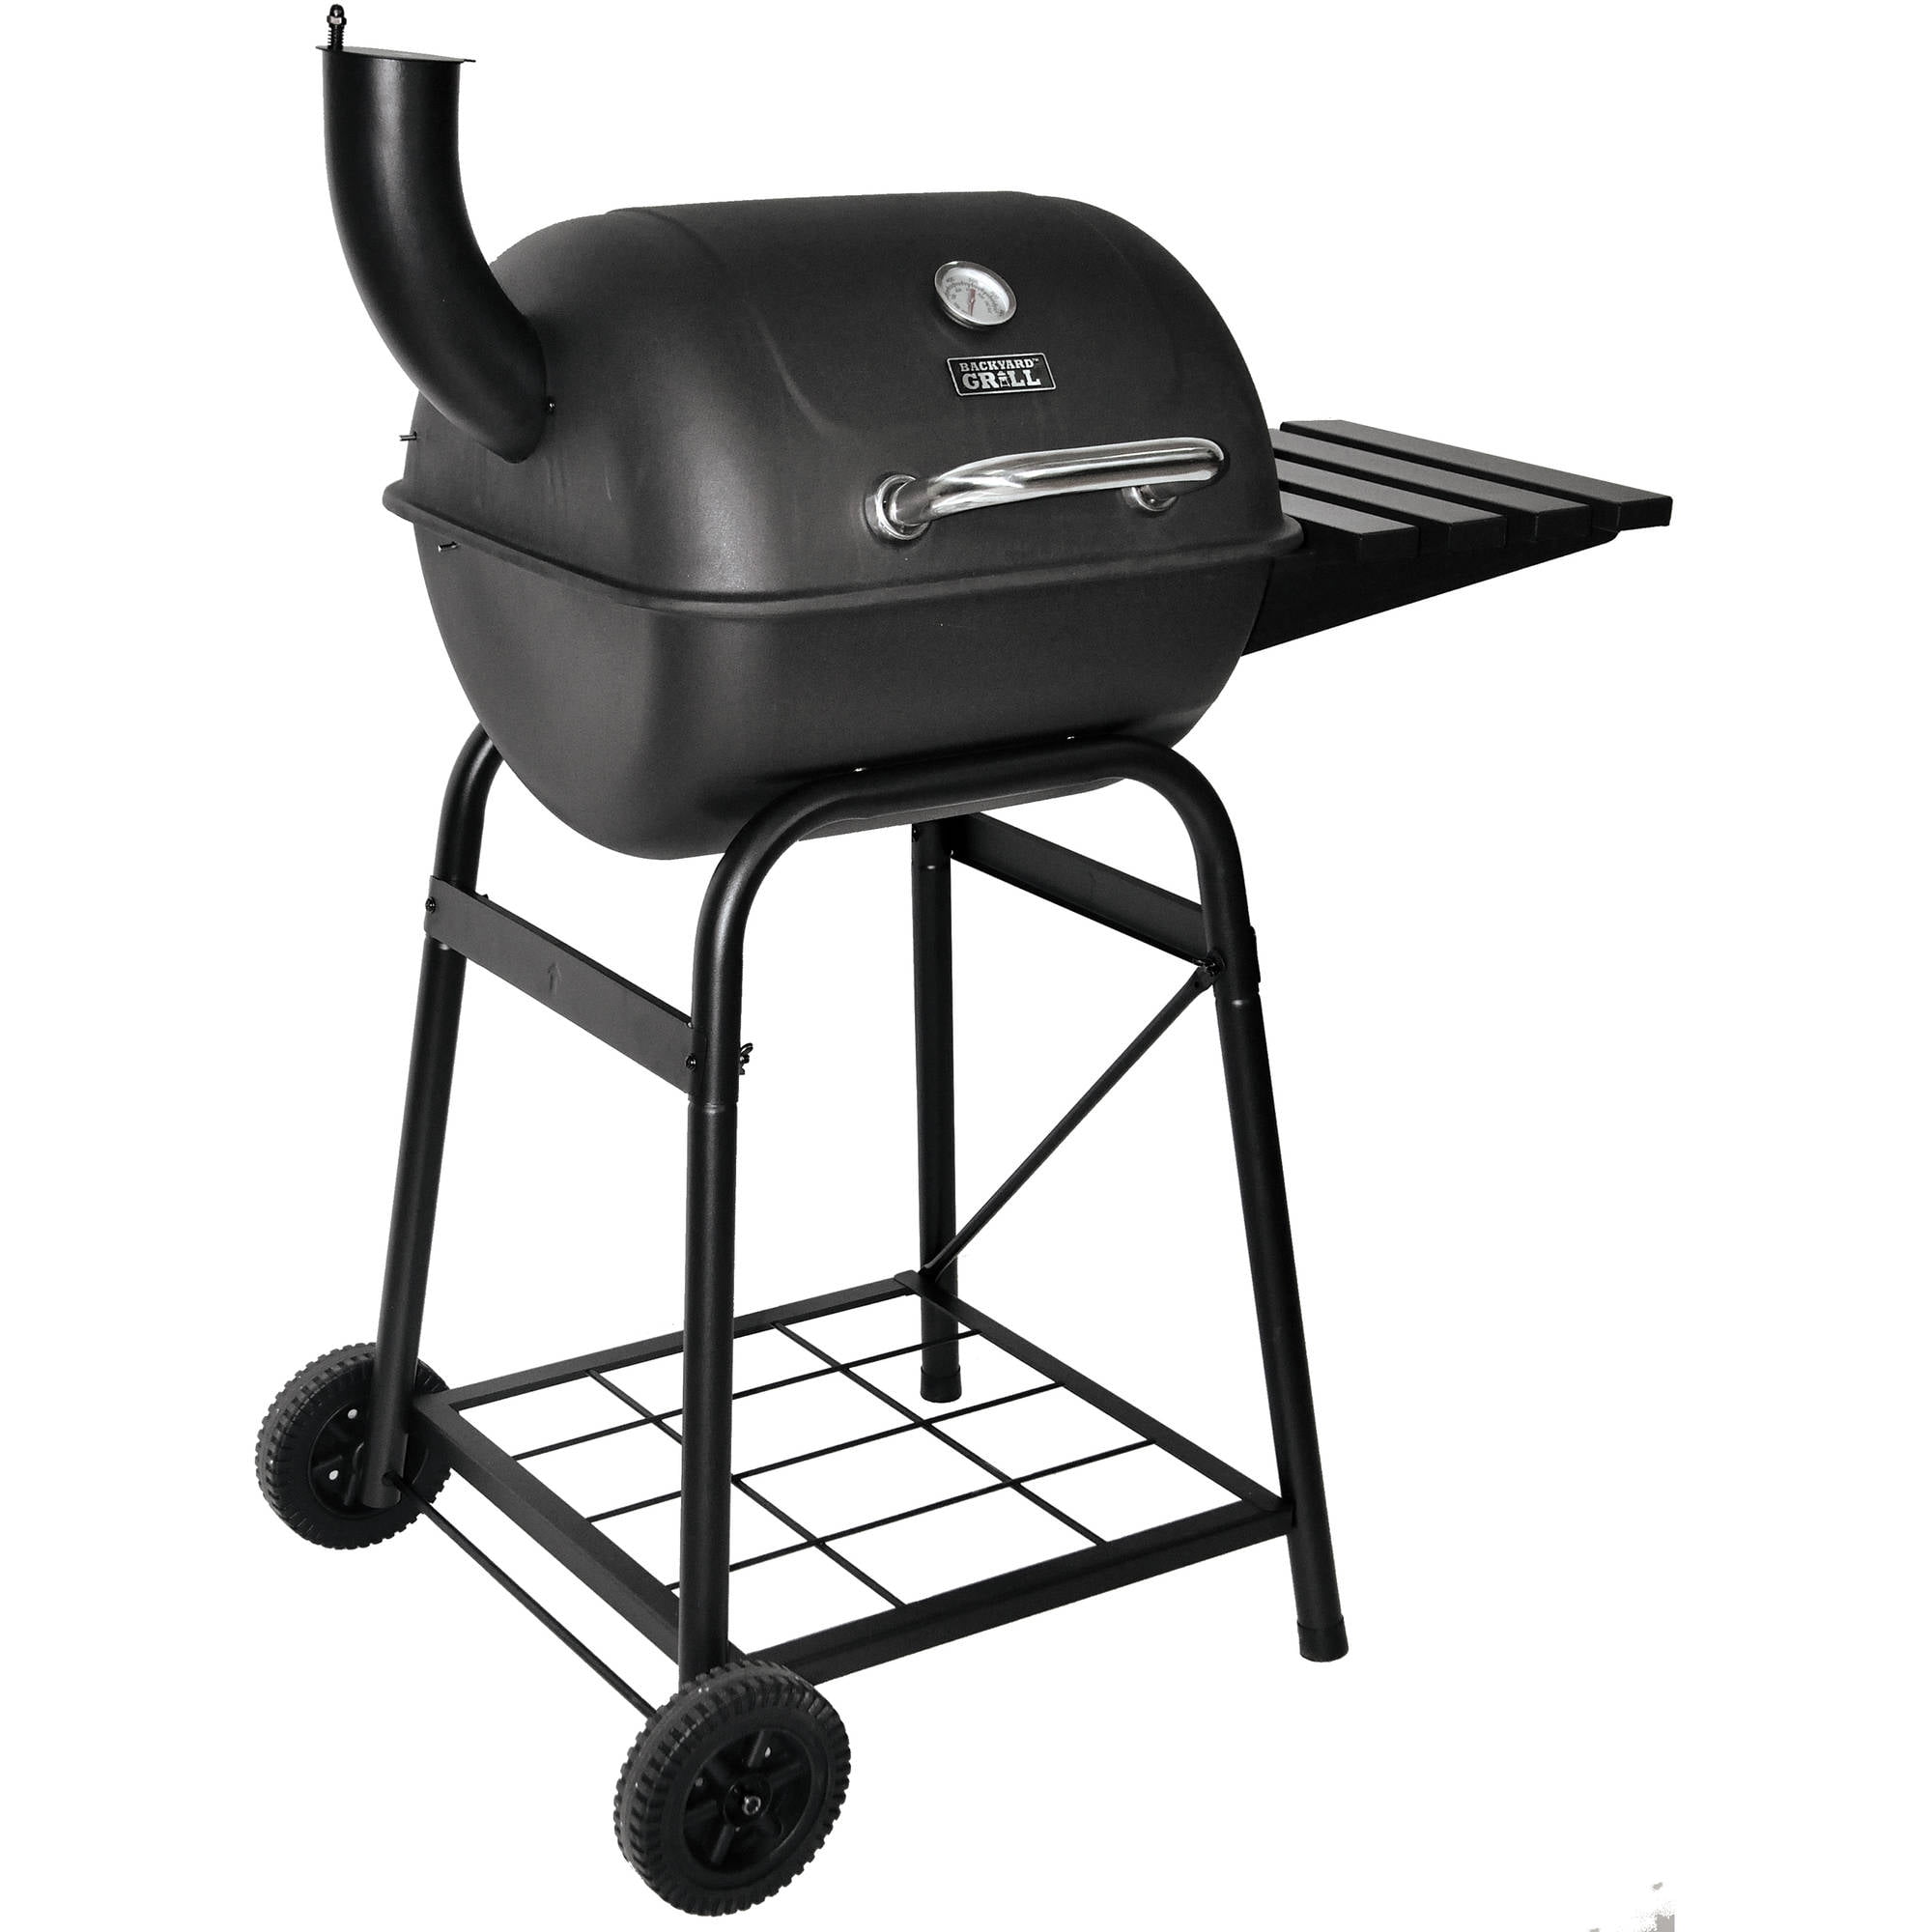 Weber Grill Hamburg Amazing Charcoal Grills With Weber Grill